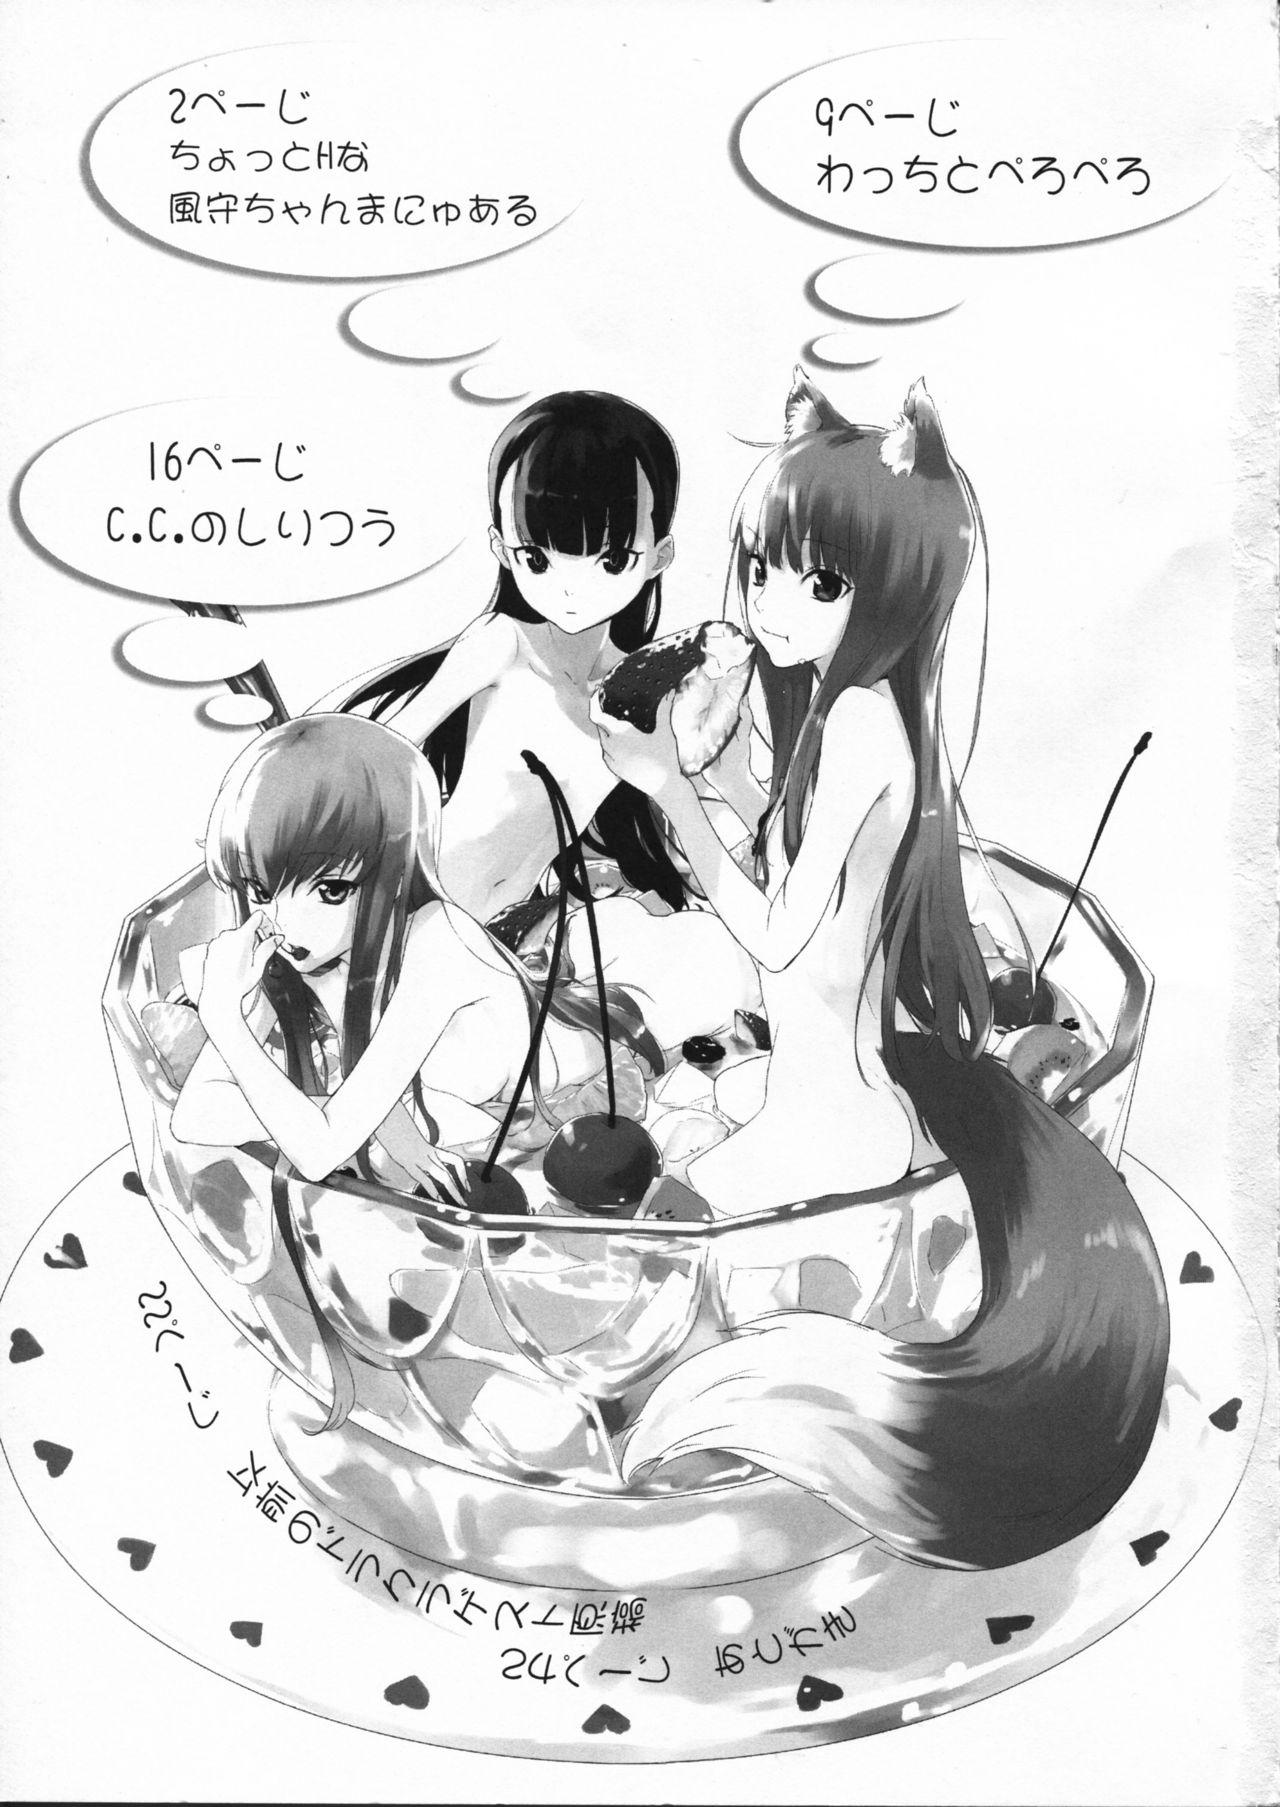 Young Men Ajisai Maiden vol.1 - Code geass Spice and wolf Un-go Chicks - Page 3